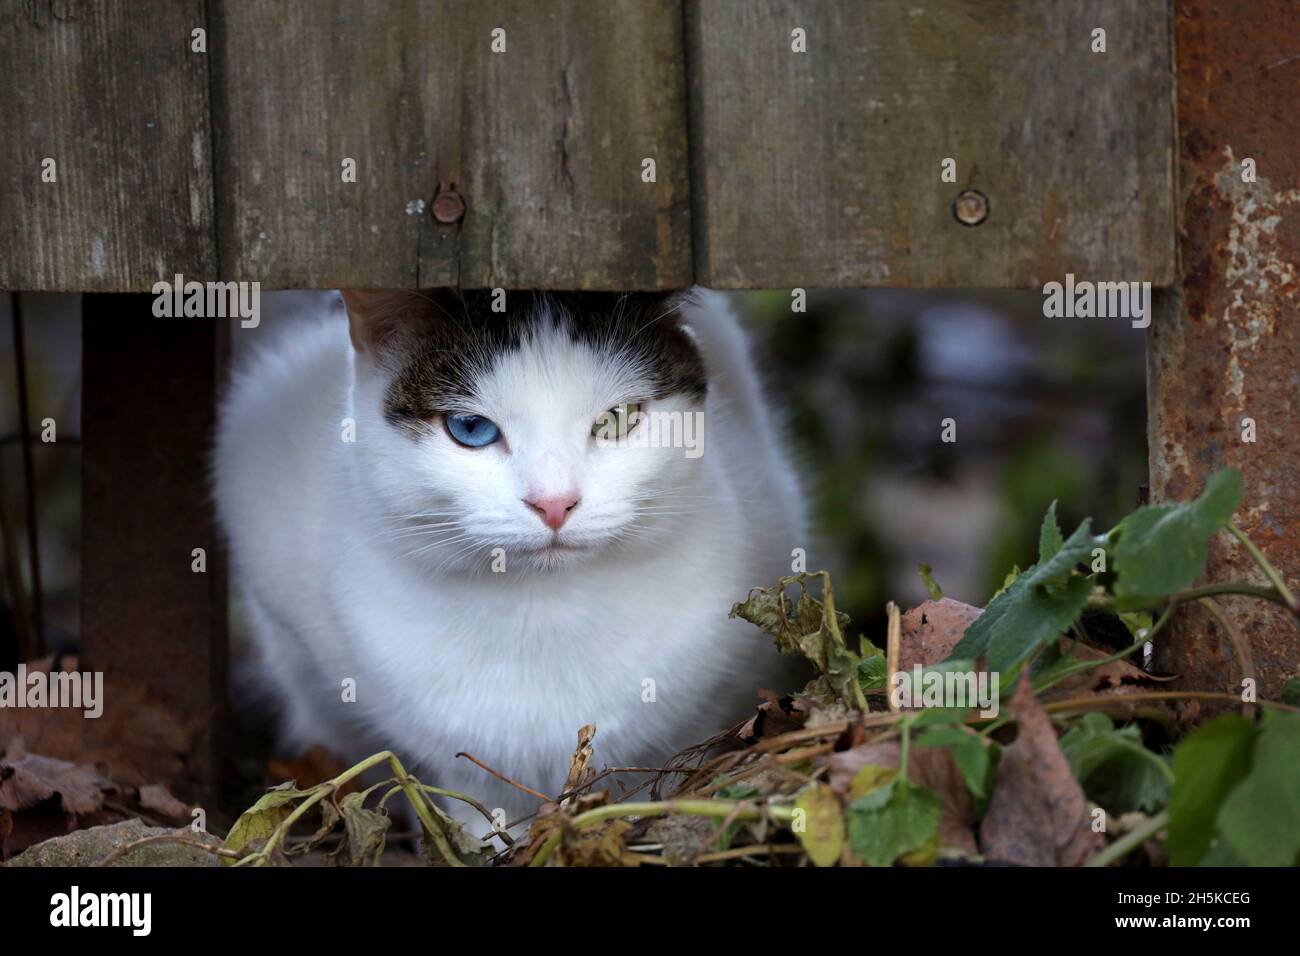 White gray cat with eyes of blue and green colors sitting under the wooden fence. Portrait of animal with heterochromia on rural street Stock Photo